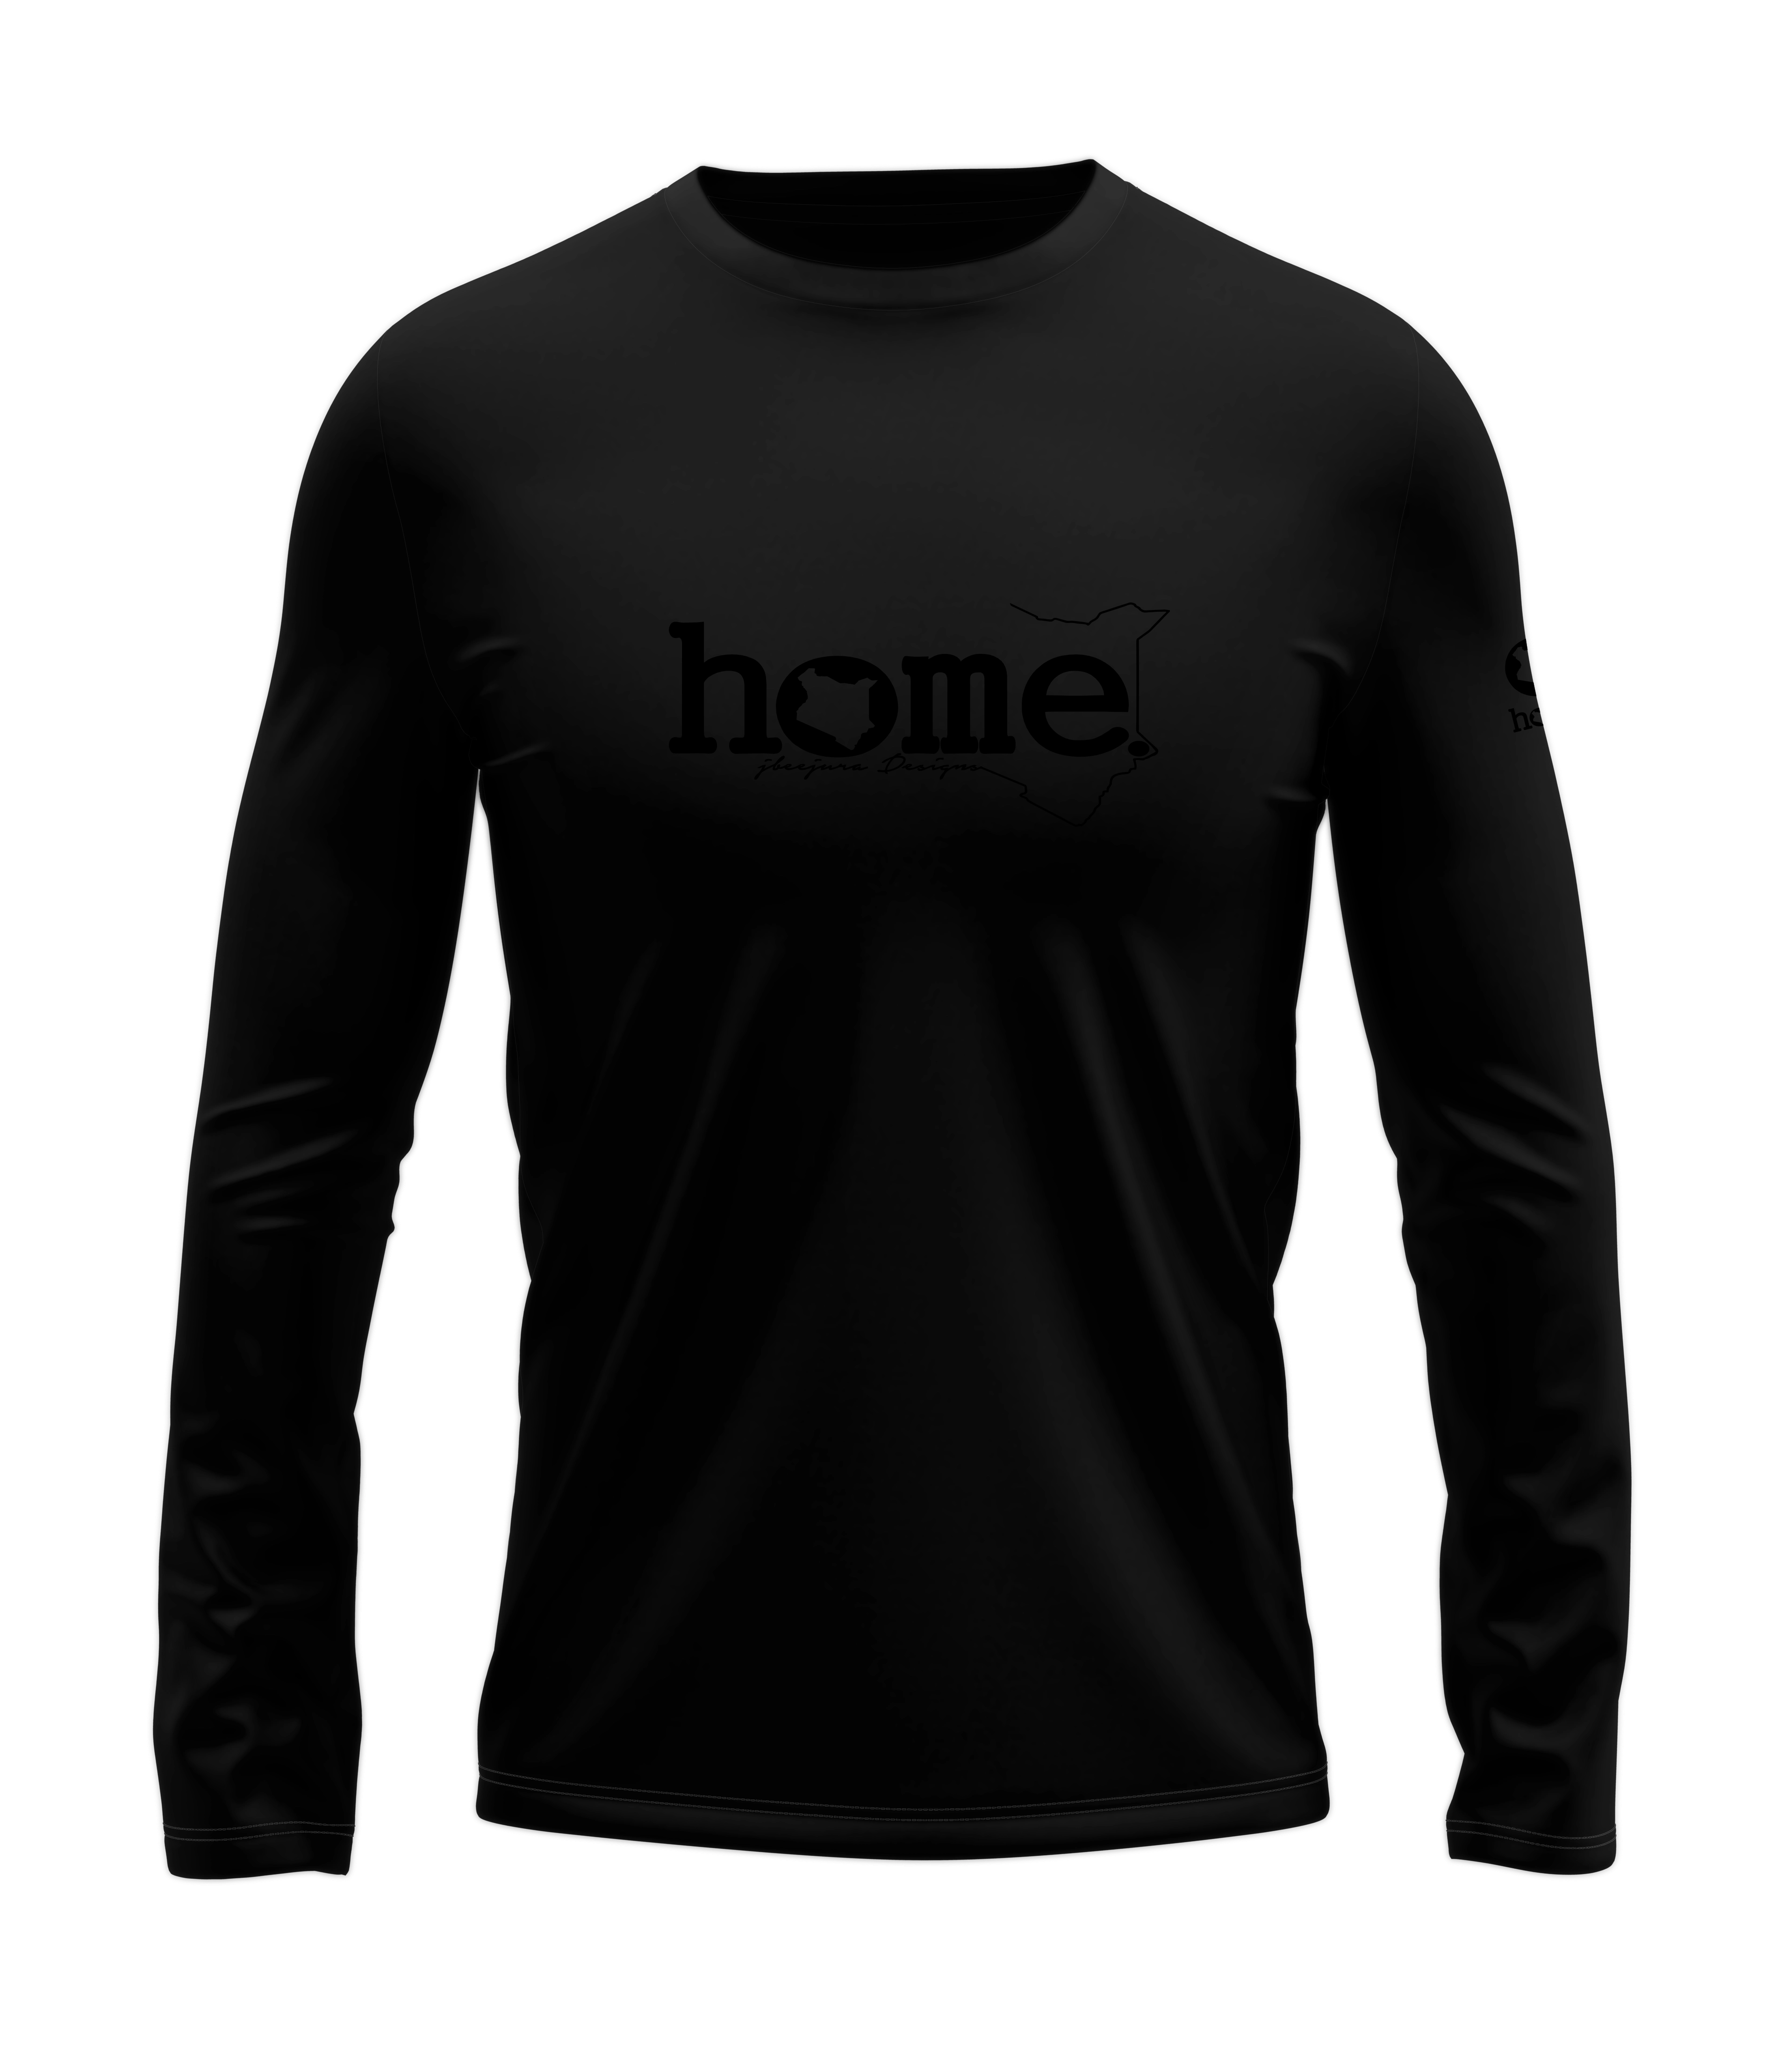 home_254 LONG-SLEEVED BLACK T-SHIRT WITH A BLACK CLASSIC WORDS PRINT – COTTON PLUS FABRIC